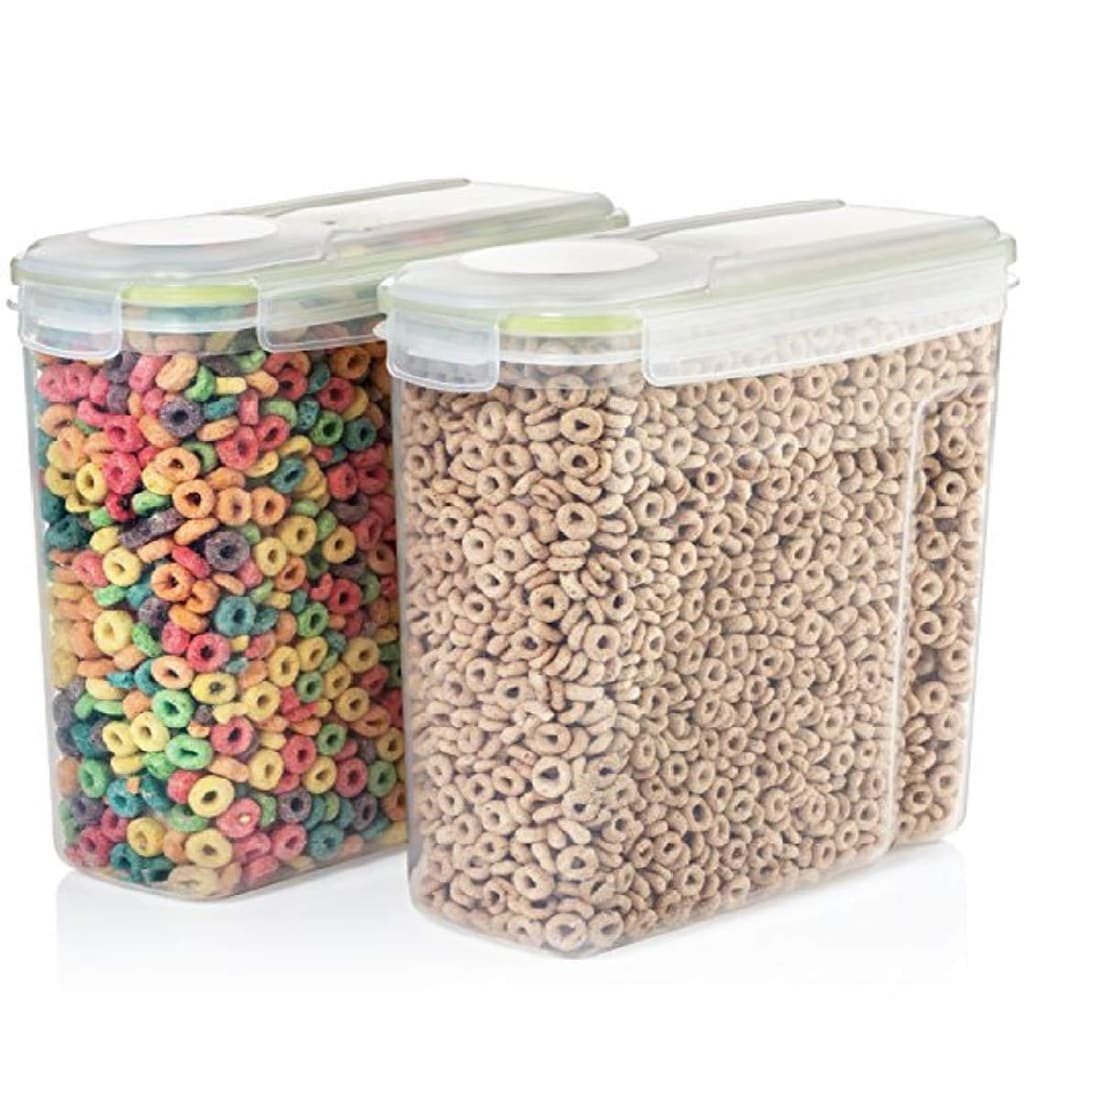 Shop Black Friday Deals On Set Of 2 Clear Plastic Cereal Food And Snack Kitchen Storage Containers With Lids Overstock 27989249